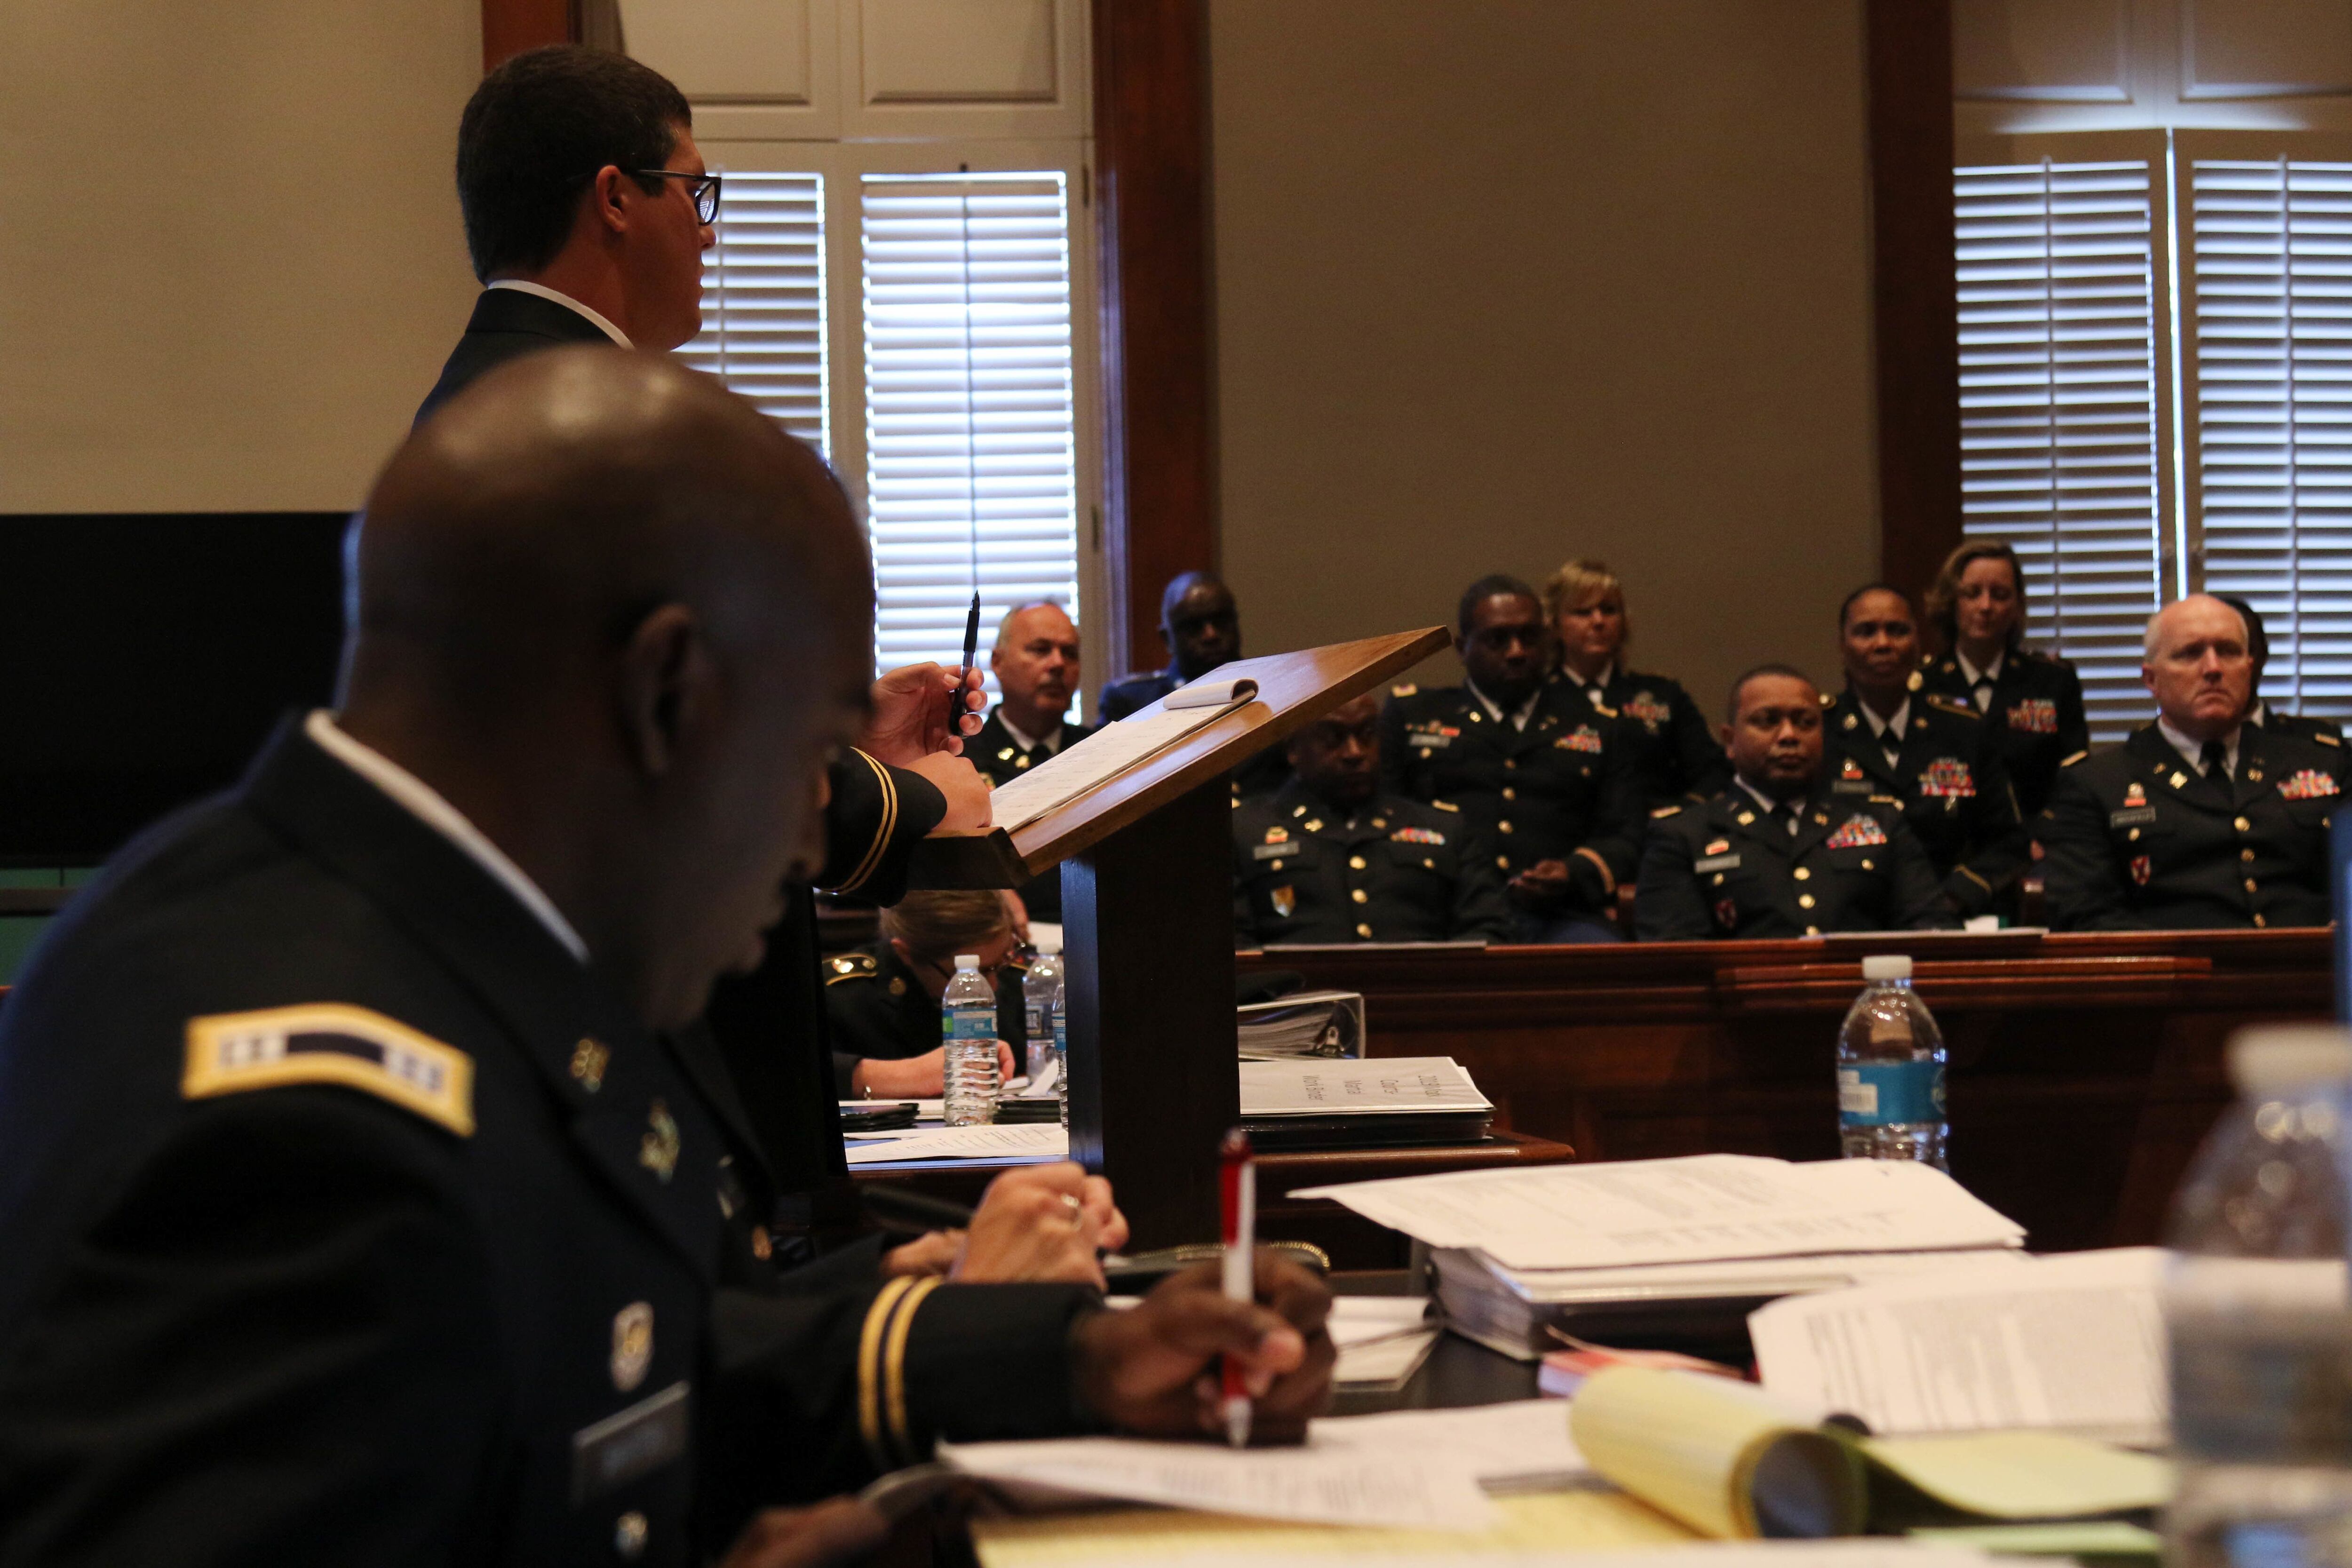 1st Lt. Charlton T. Pope, Alabama National Guard, questions a key witness during the 167th Theater Sustainment Command’s 5th Annual mock trial at the Calhoun County Courthouse, Anniston, Alabama, July 31, 2019. (Staff Sgt. Katherine Dowd/Army)